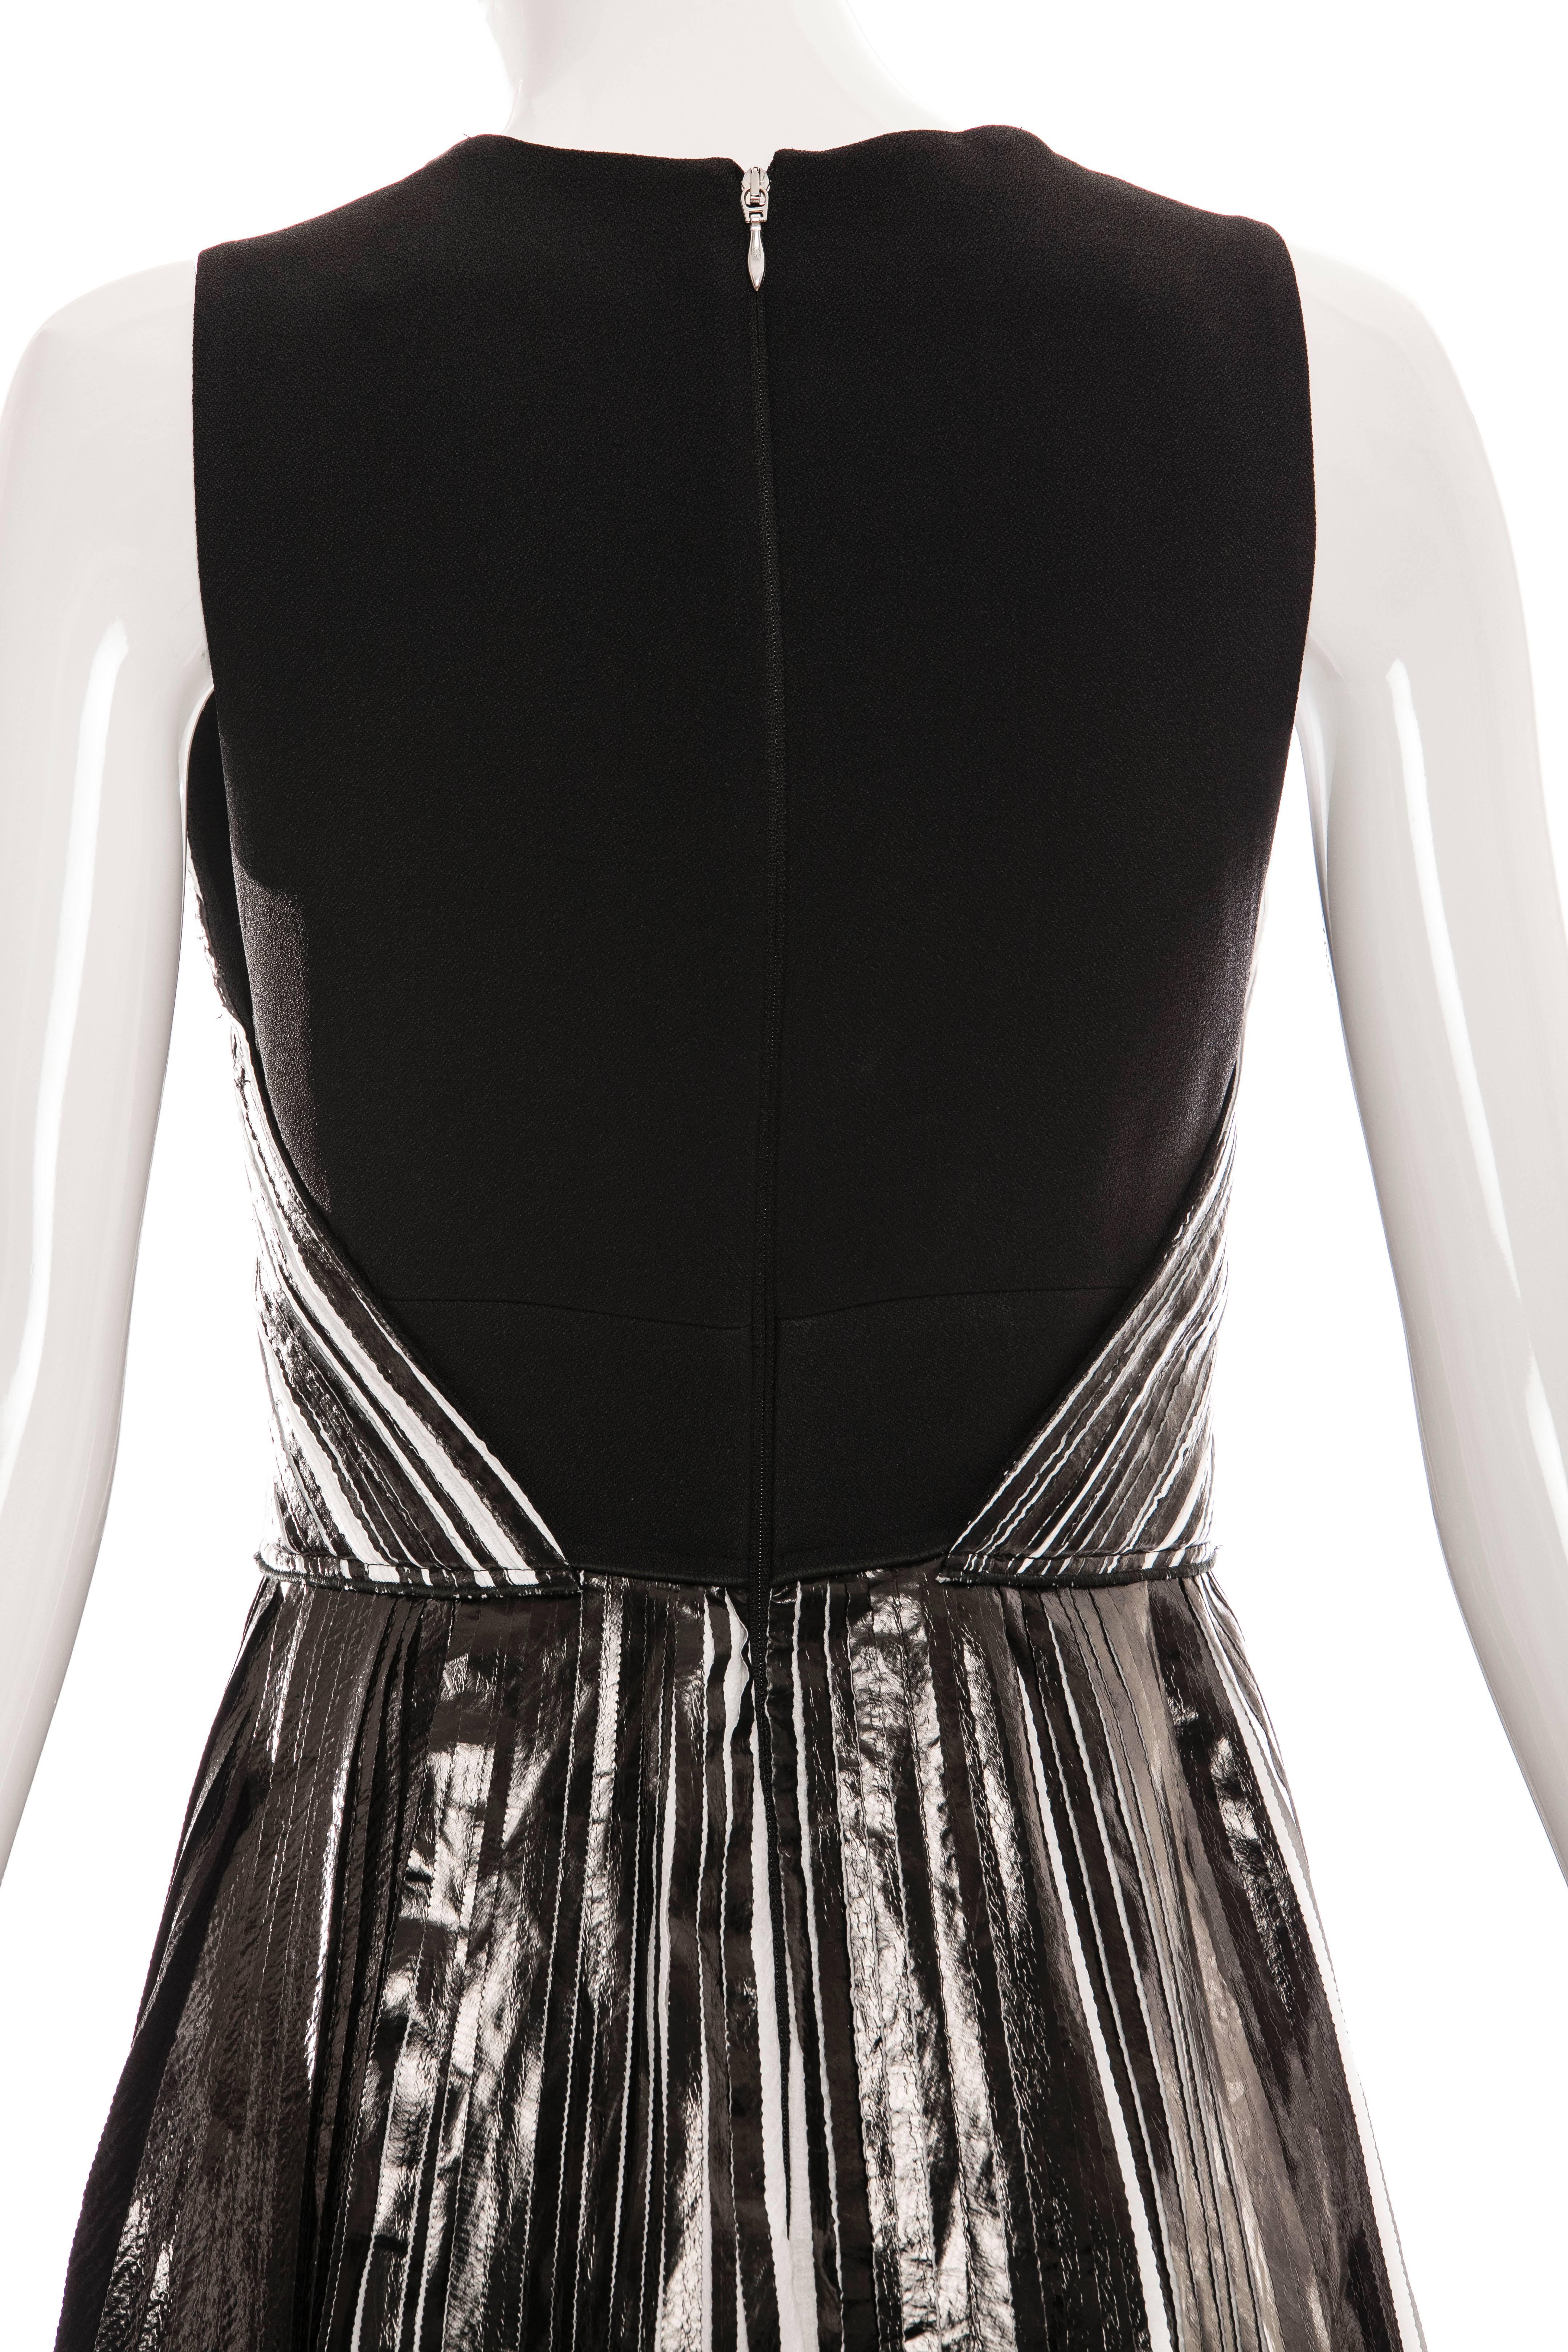 Proenza Schouler Runway Sleeveless Crystal Pleated Dress, Spring 2014 For Sale 2